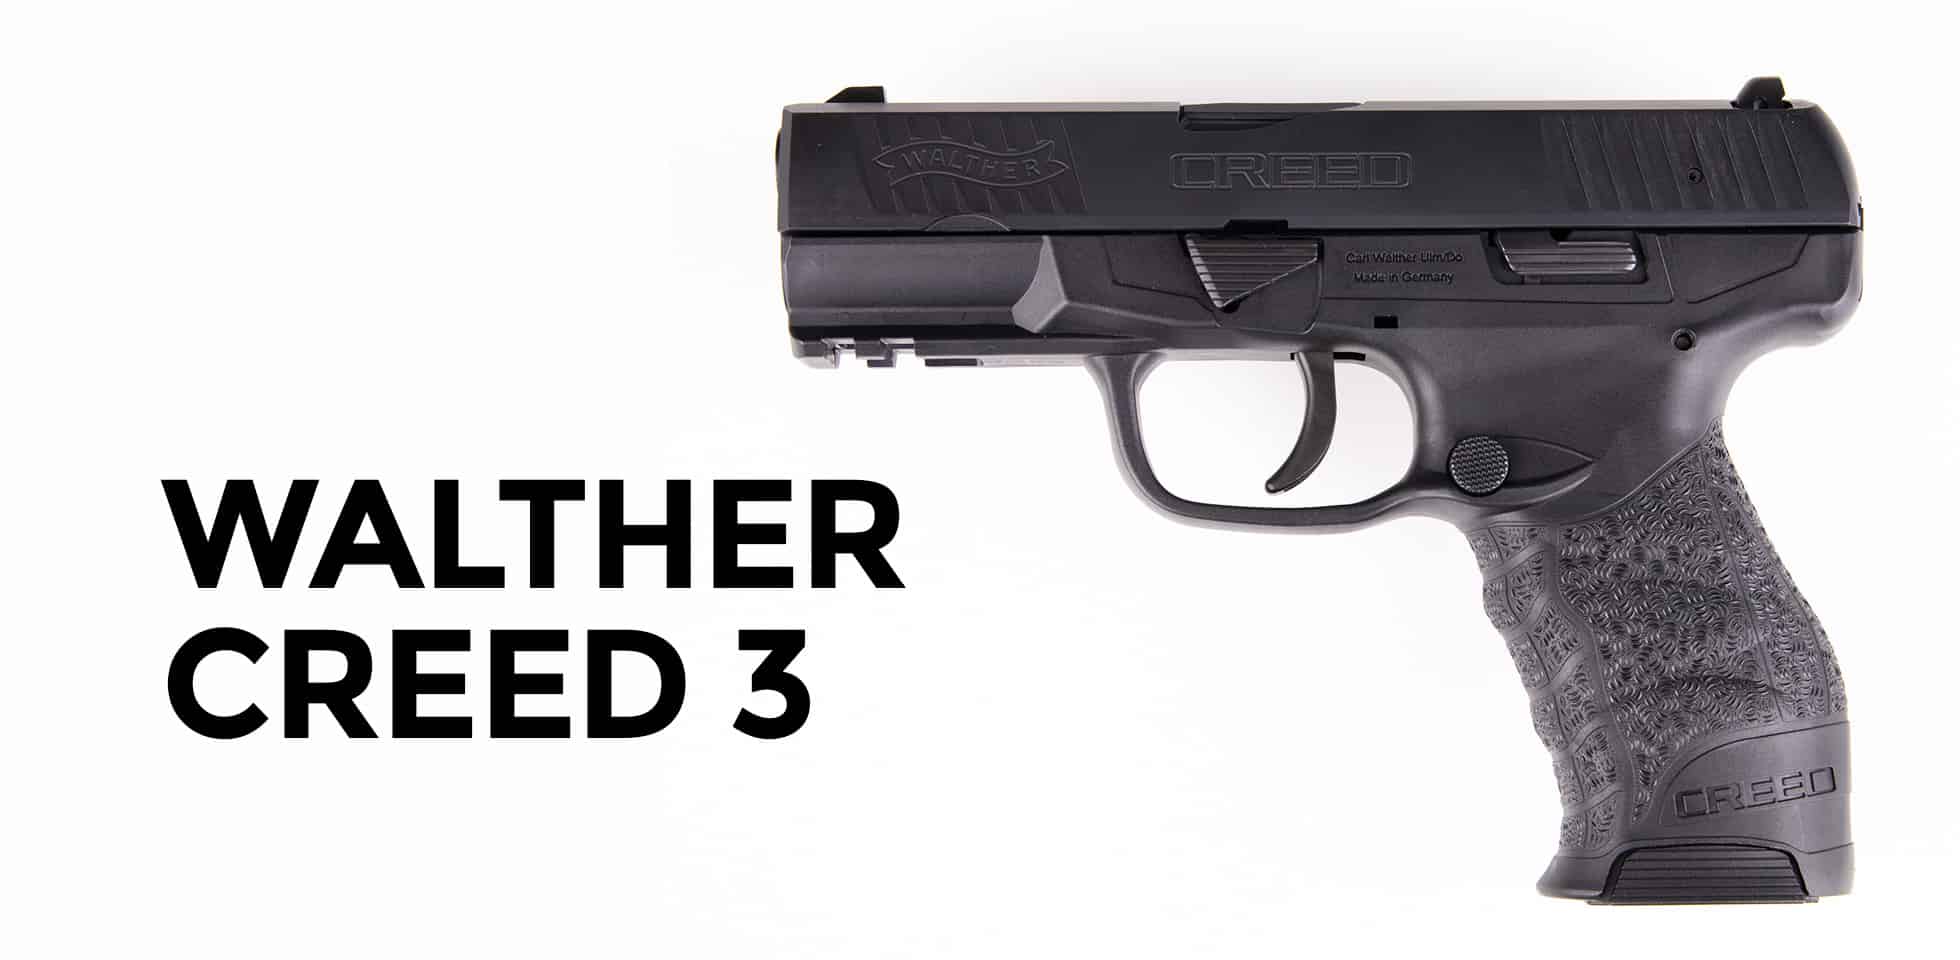 Walther Creed 3 9mm pistol